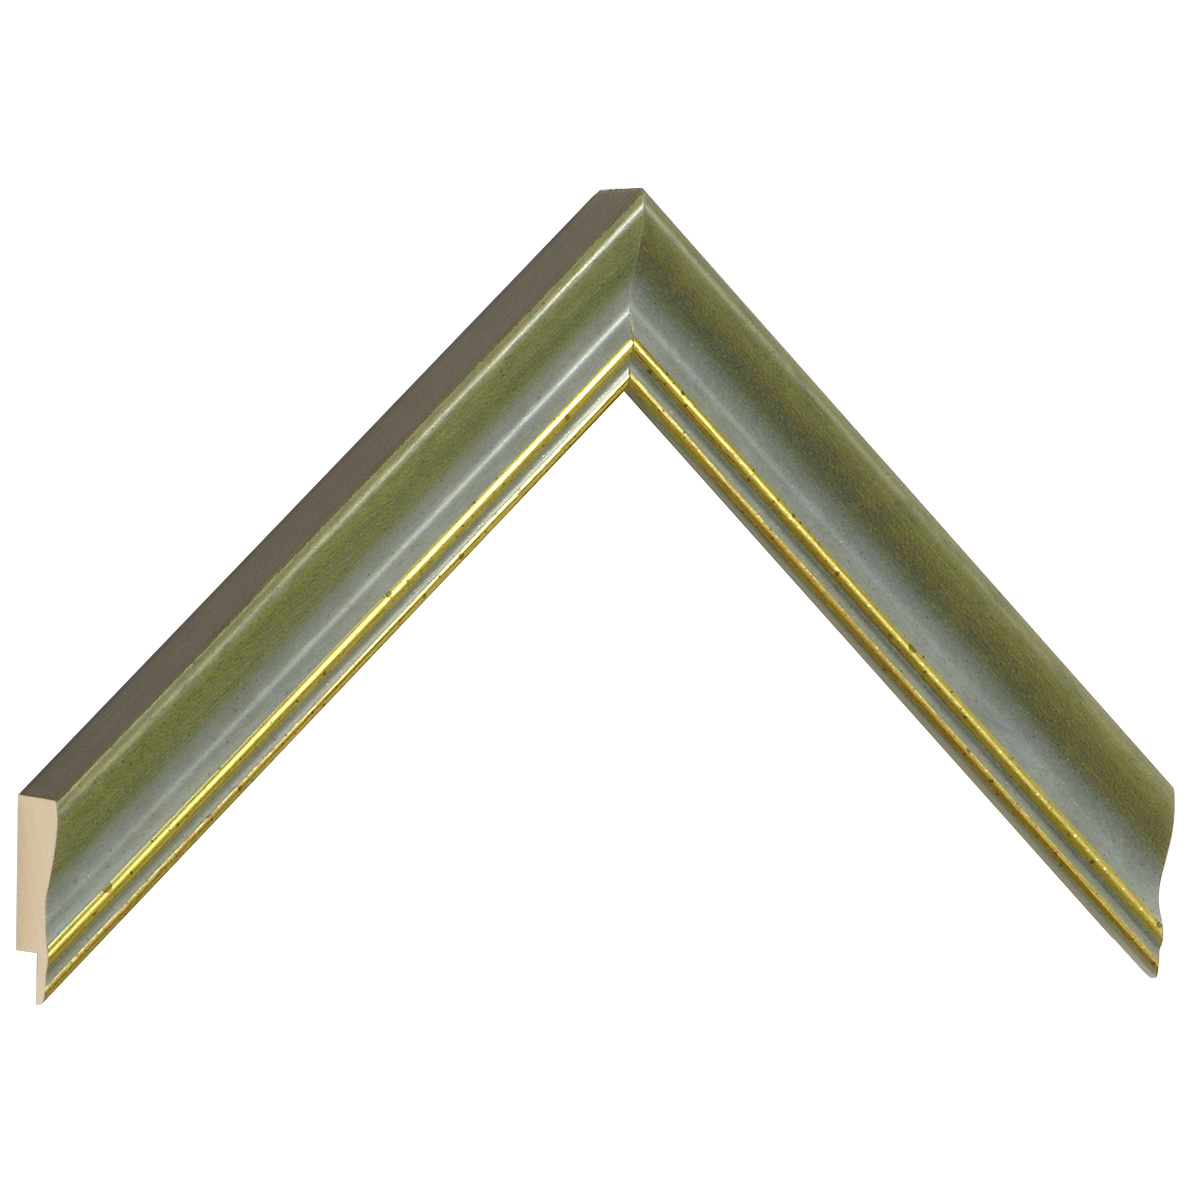 Moulding ayous jointed width 25mm - matt green with gold edge - Sample